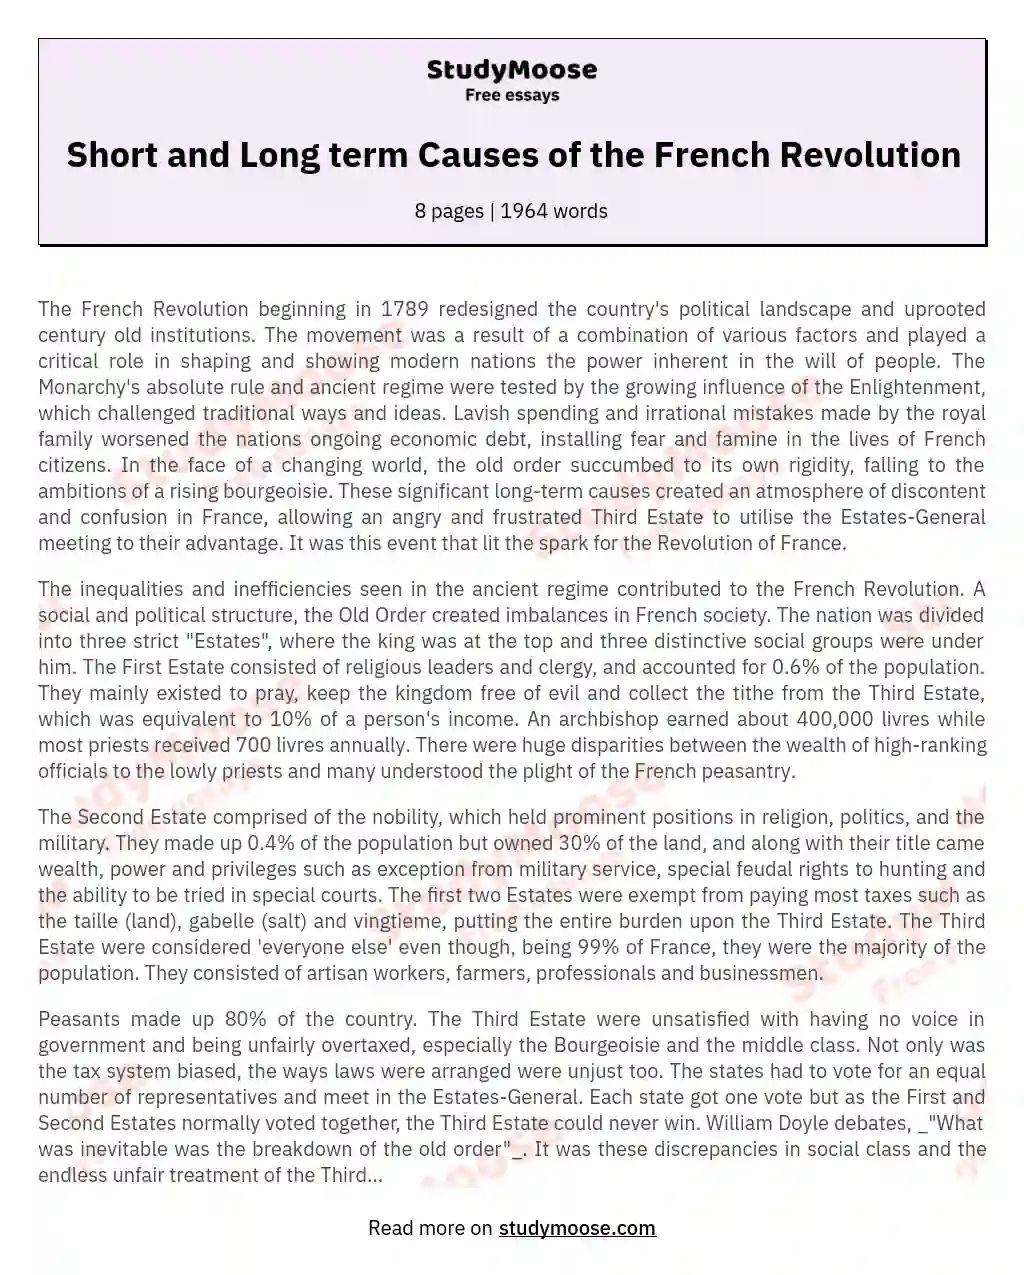 Short and Long term Causes of the French Revolution essay